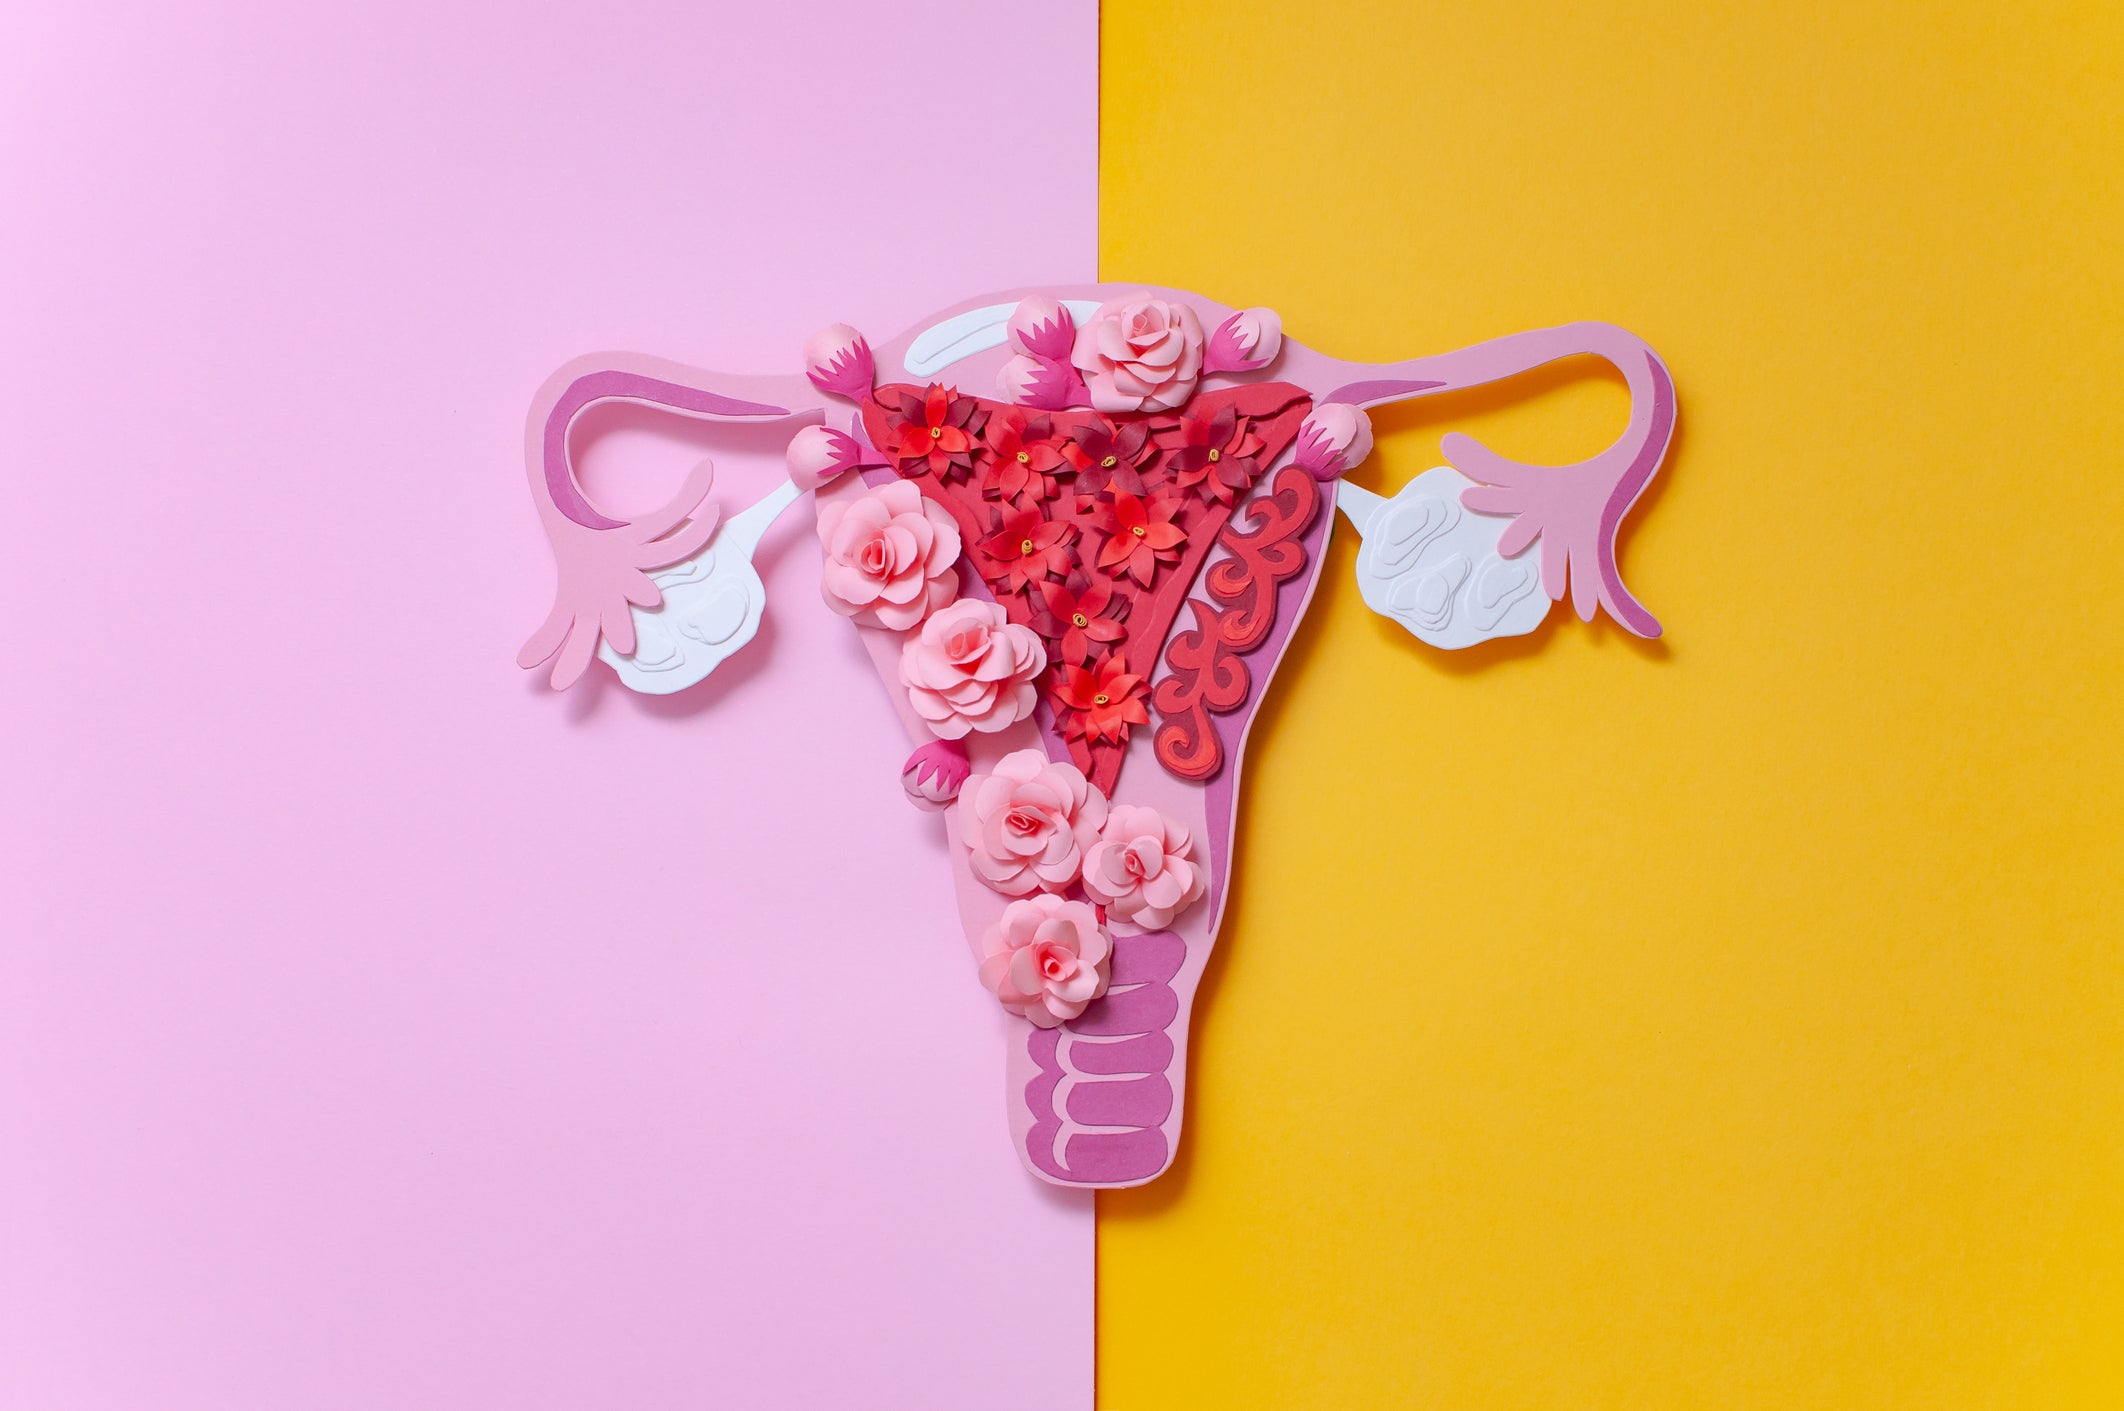 Endometriosis was identified in the 1920s but its causes are still not understood